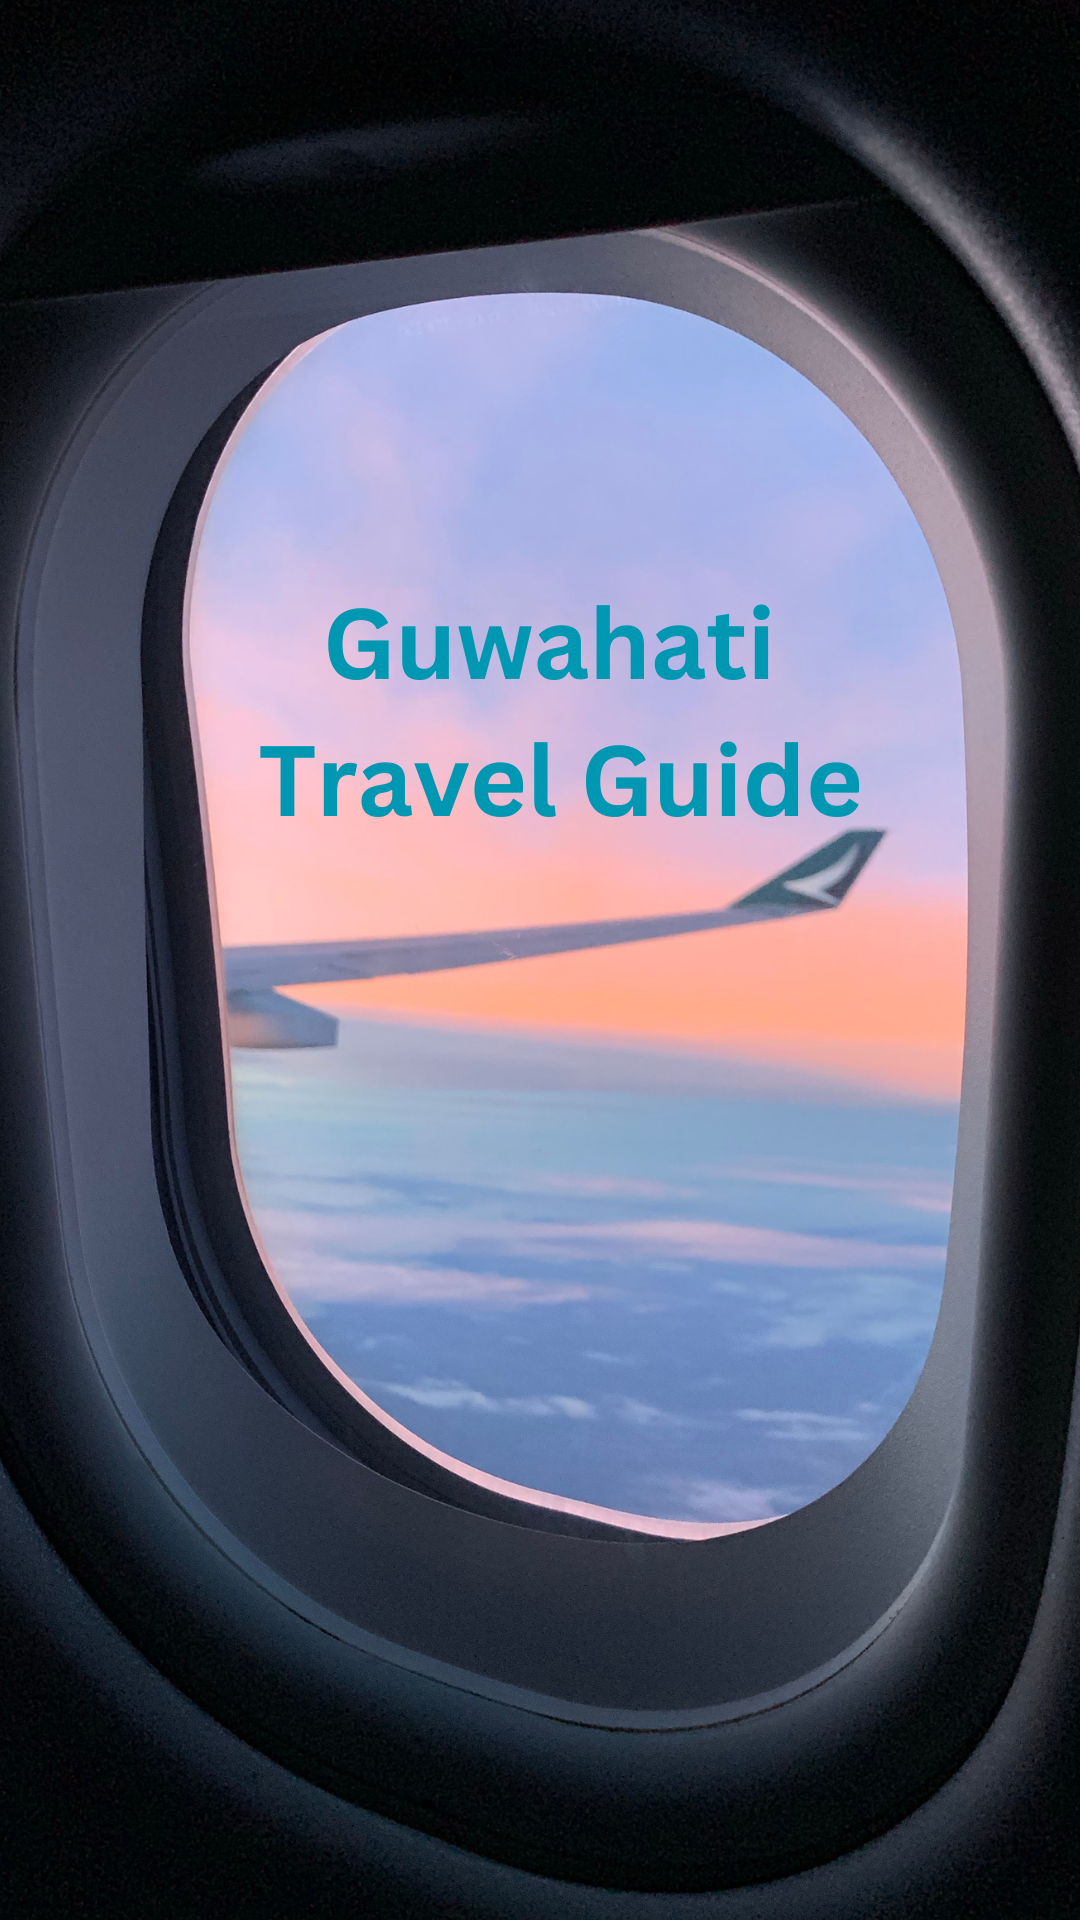 Things to do in Guwahati